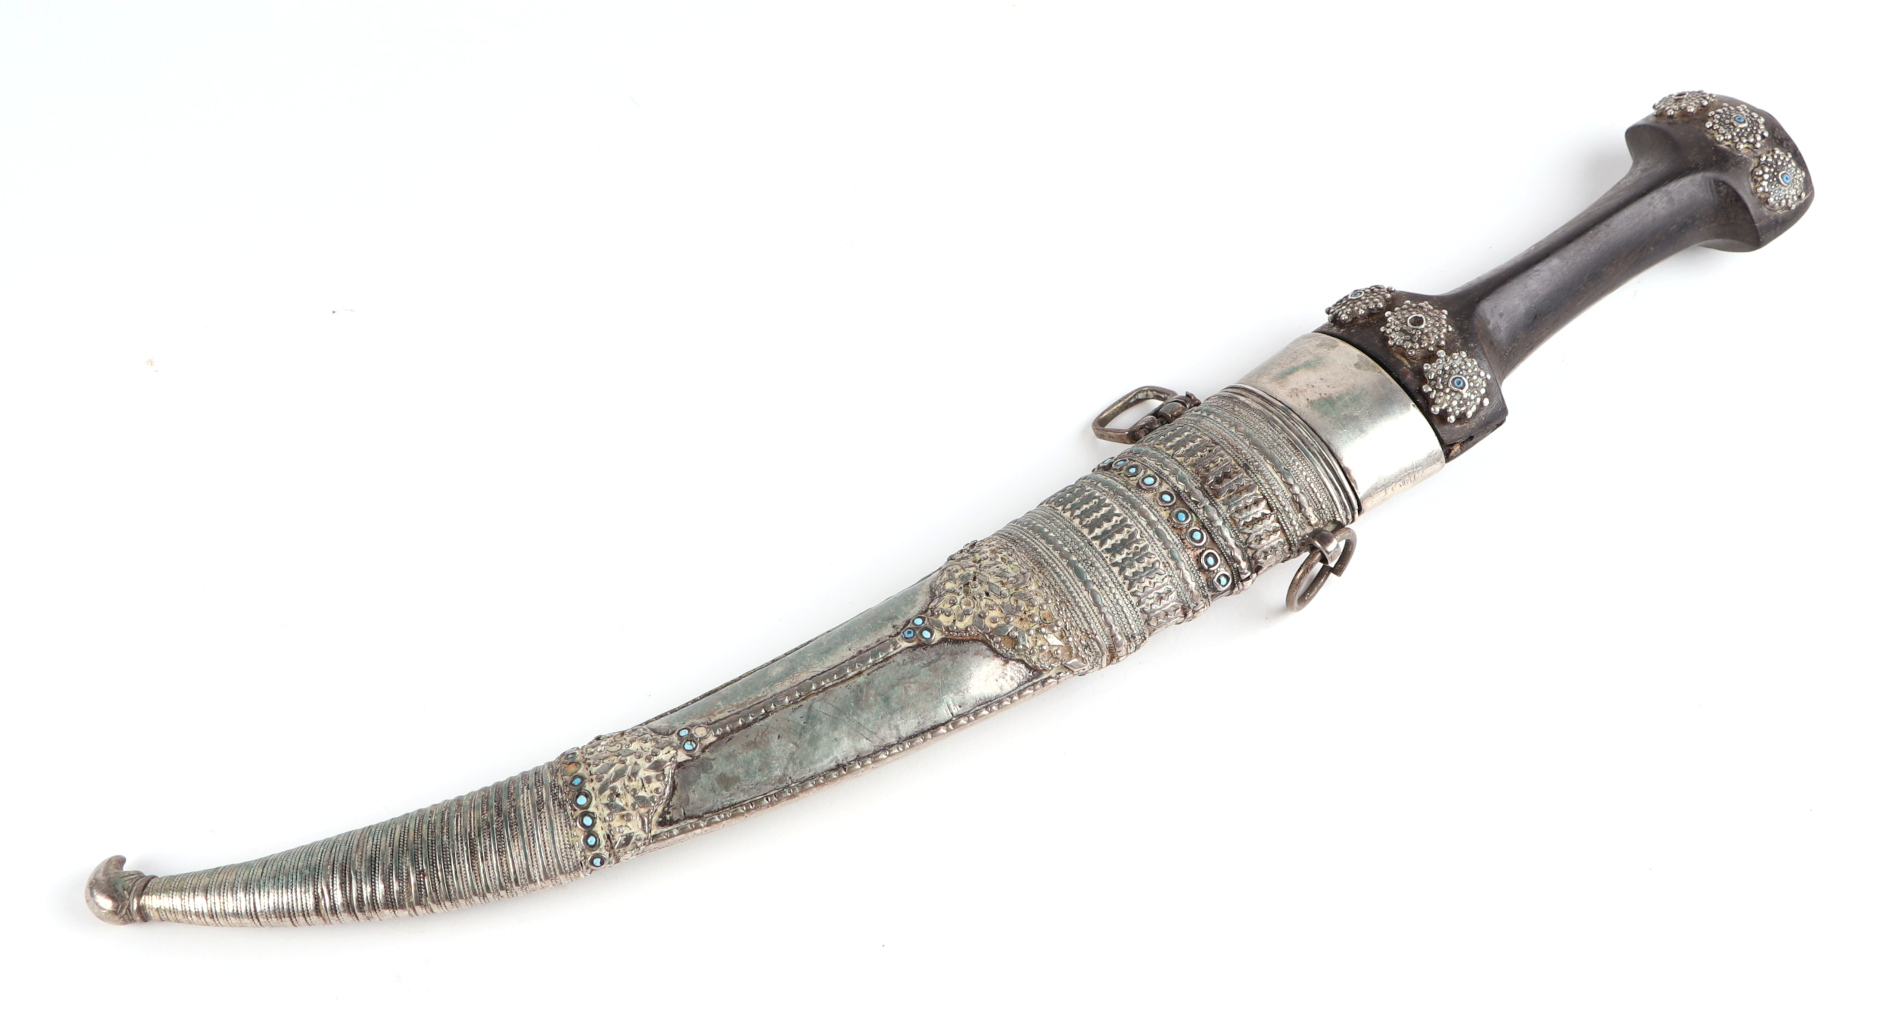 A Persian Khanjar dagger with steel double fuller curved blade, jewelled with metal scabbard and